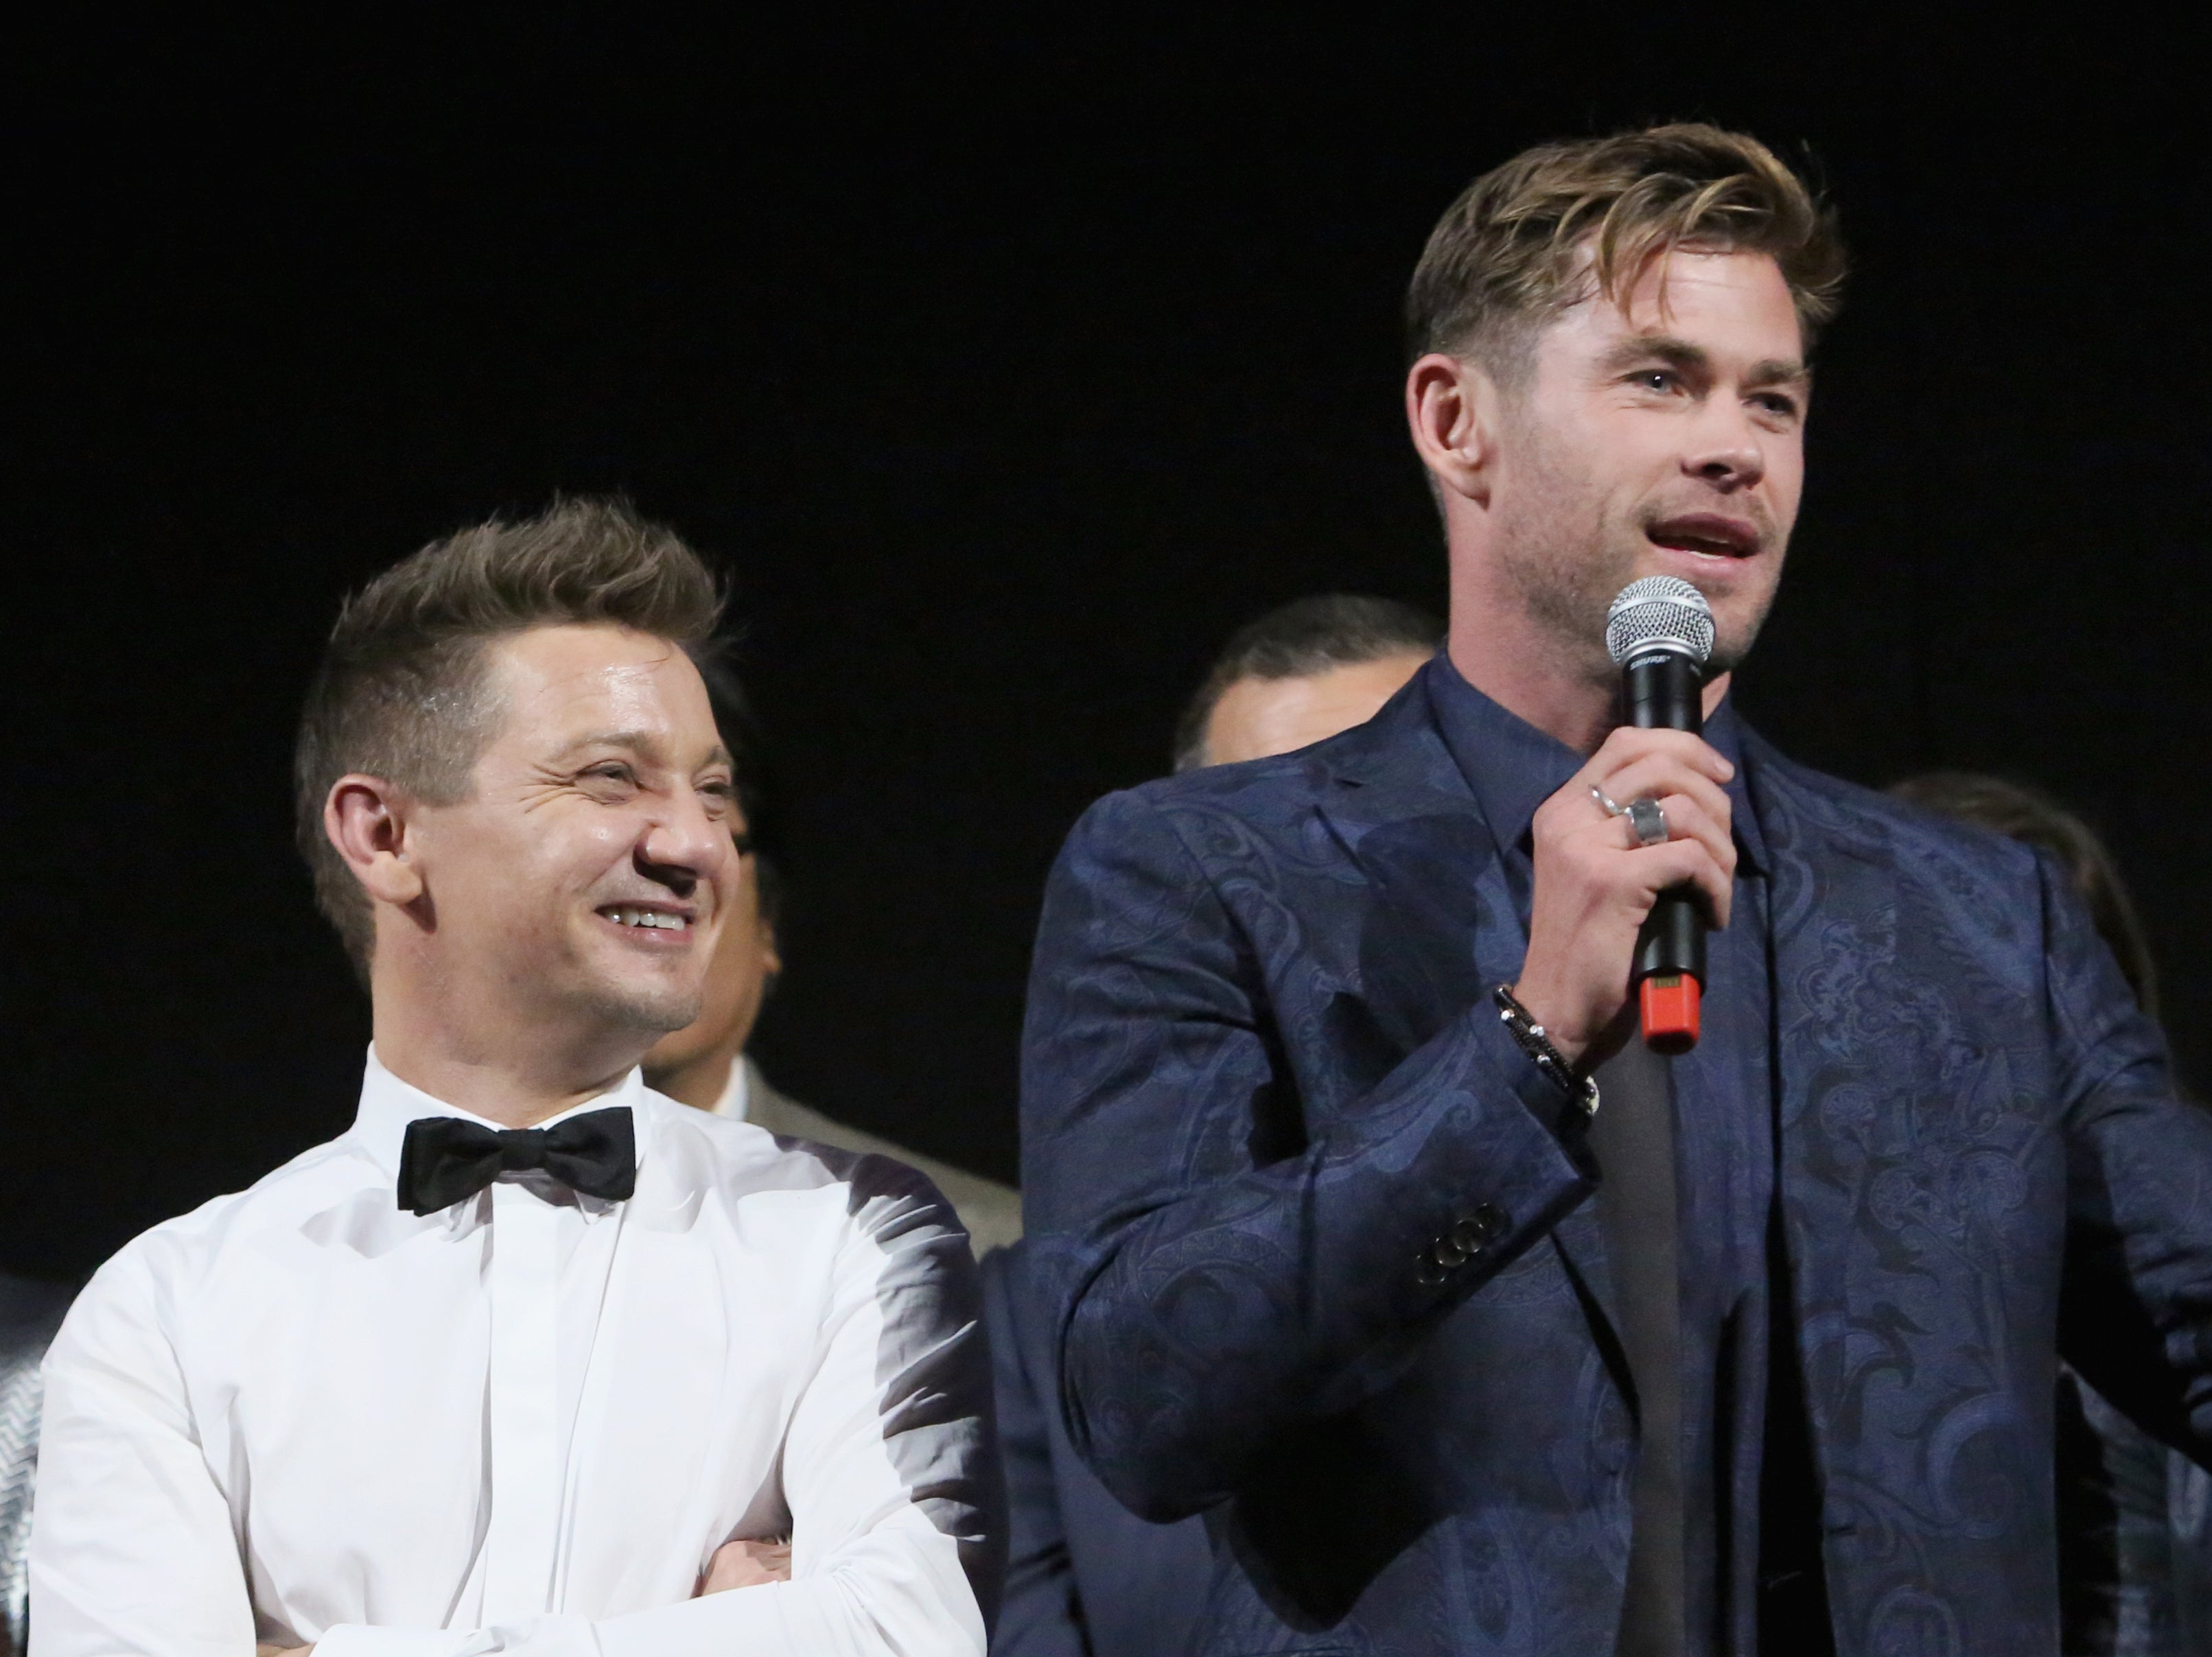 Chris Hemsworth has praised Jeremy Renner’s recovery after he was involved in a snowplough accident at the start of 2023